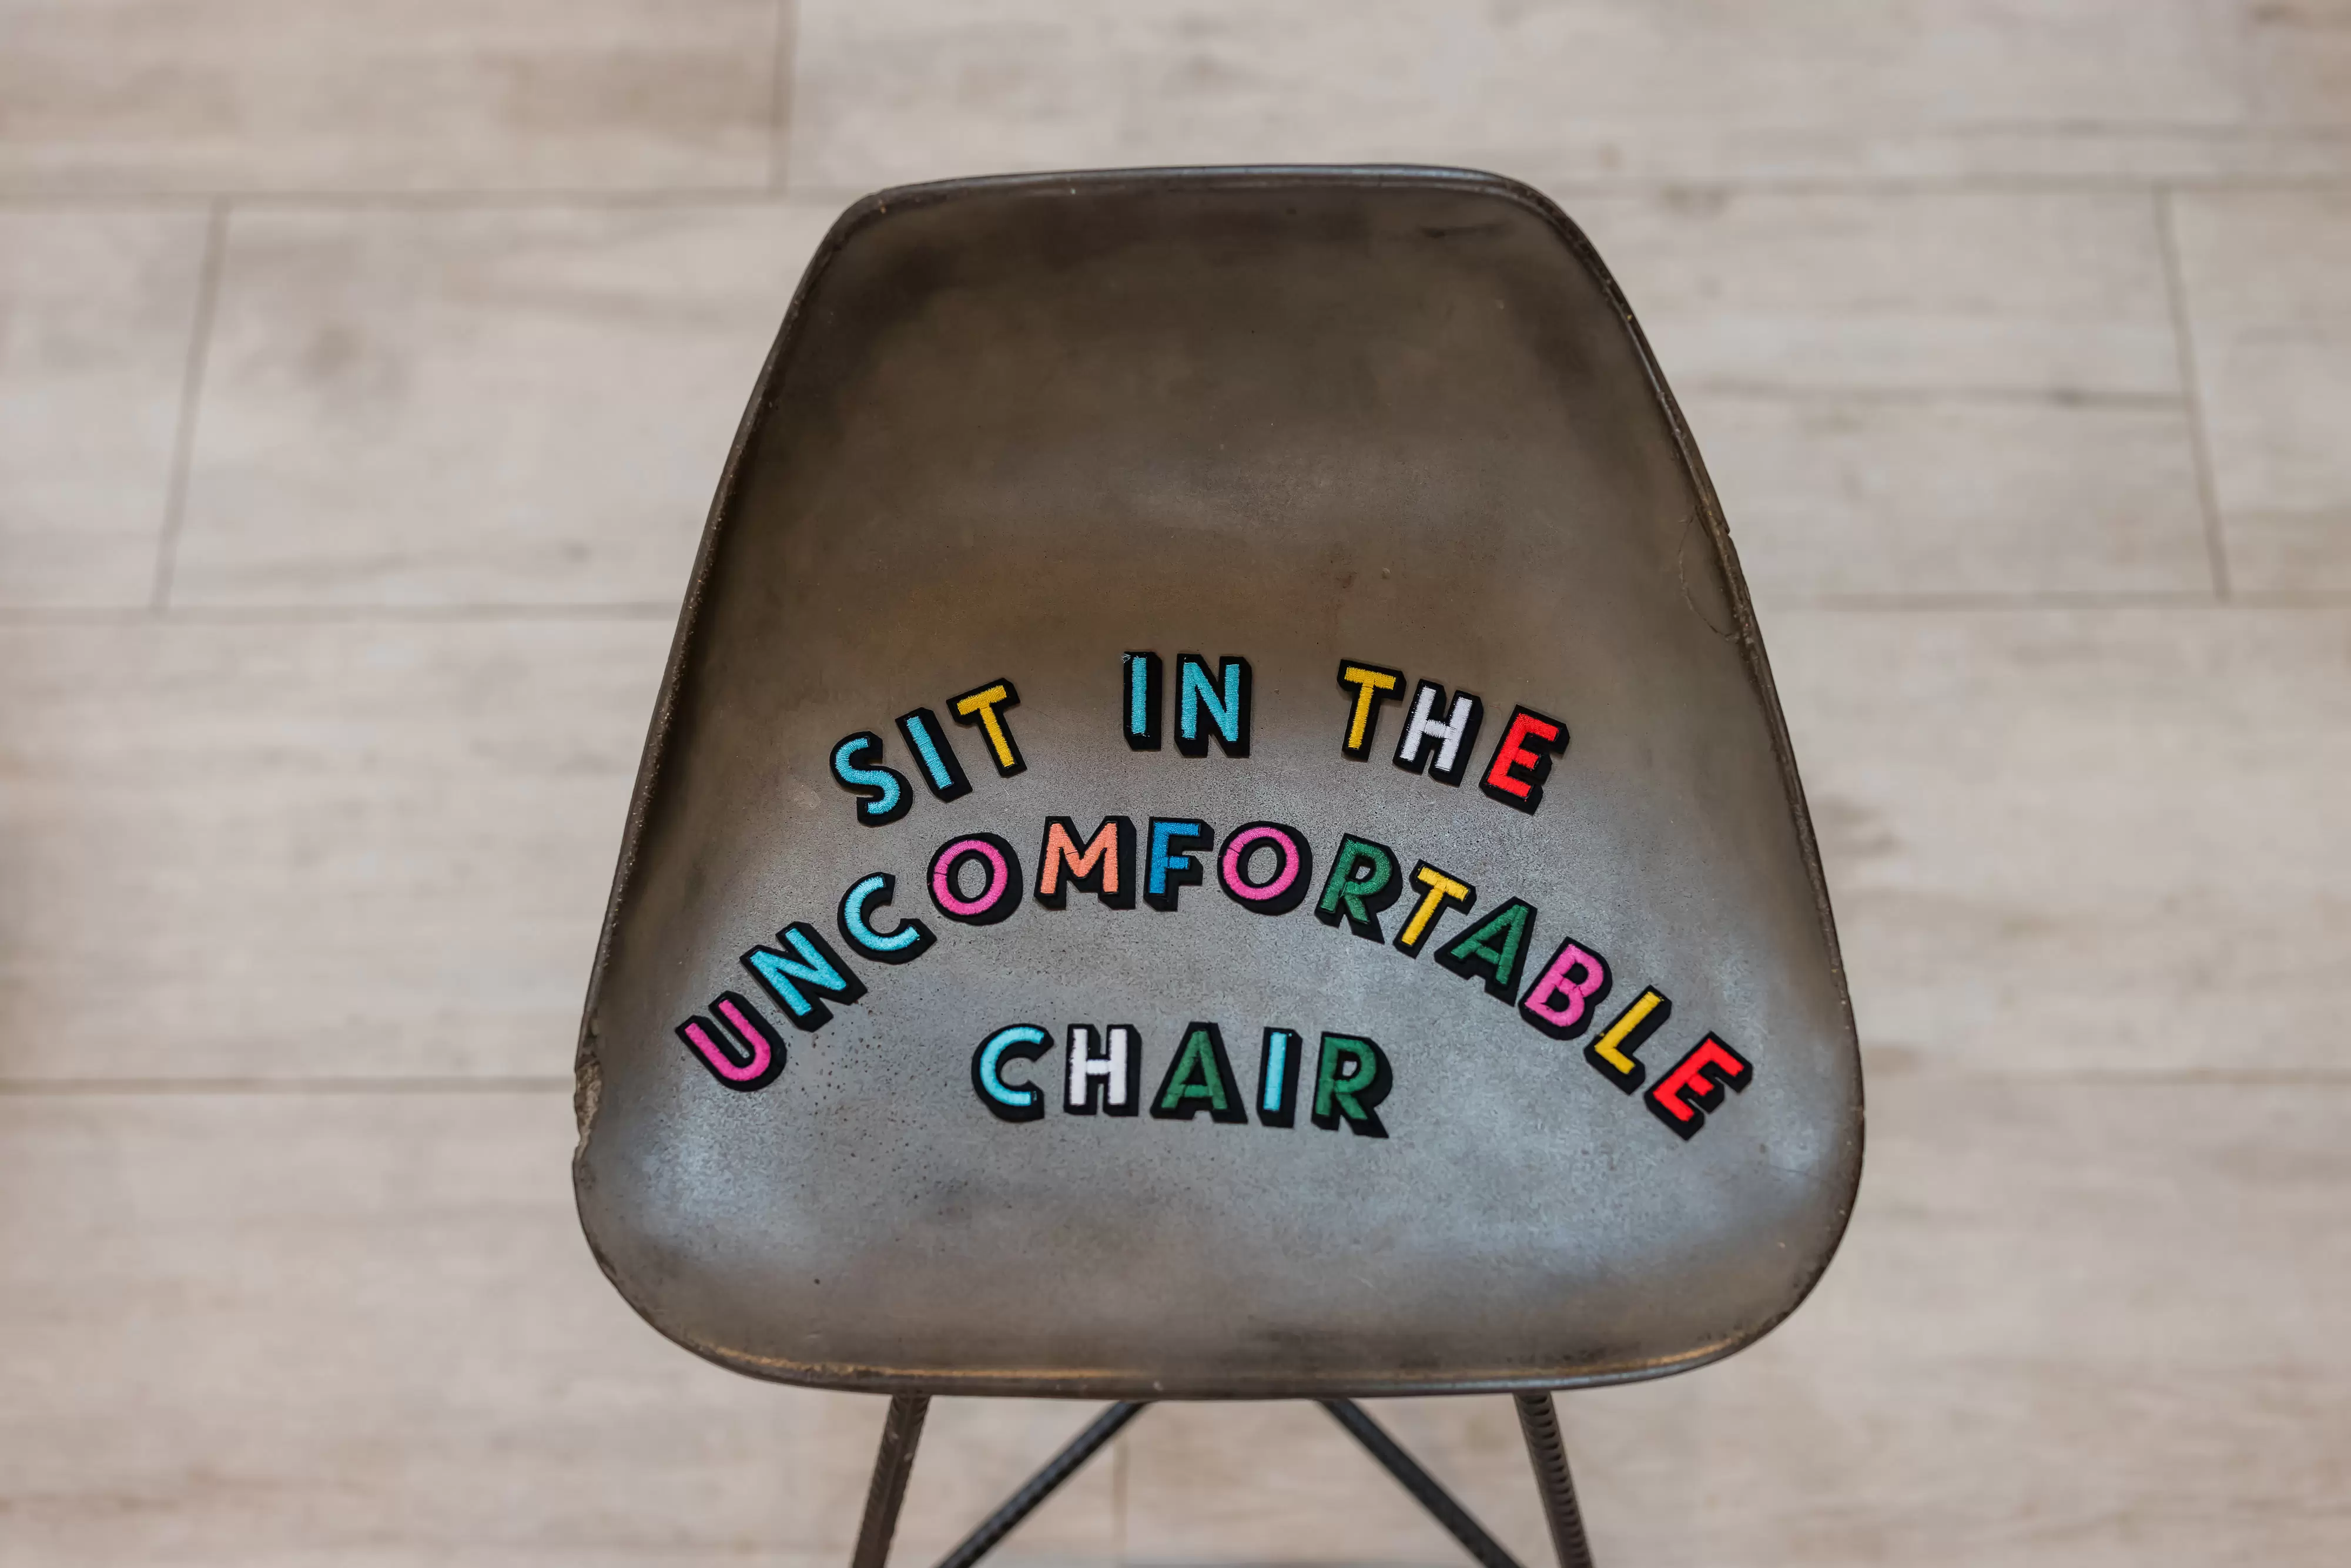 Sit in the uncomfortable chair